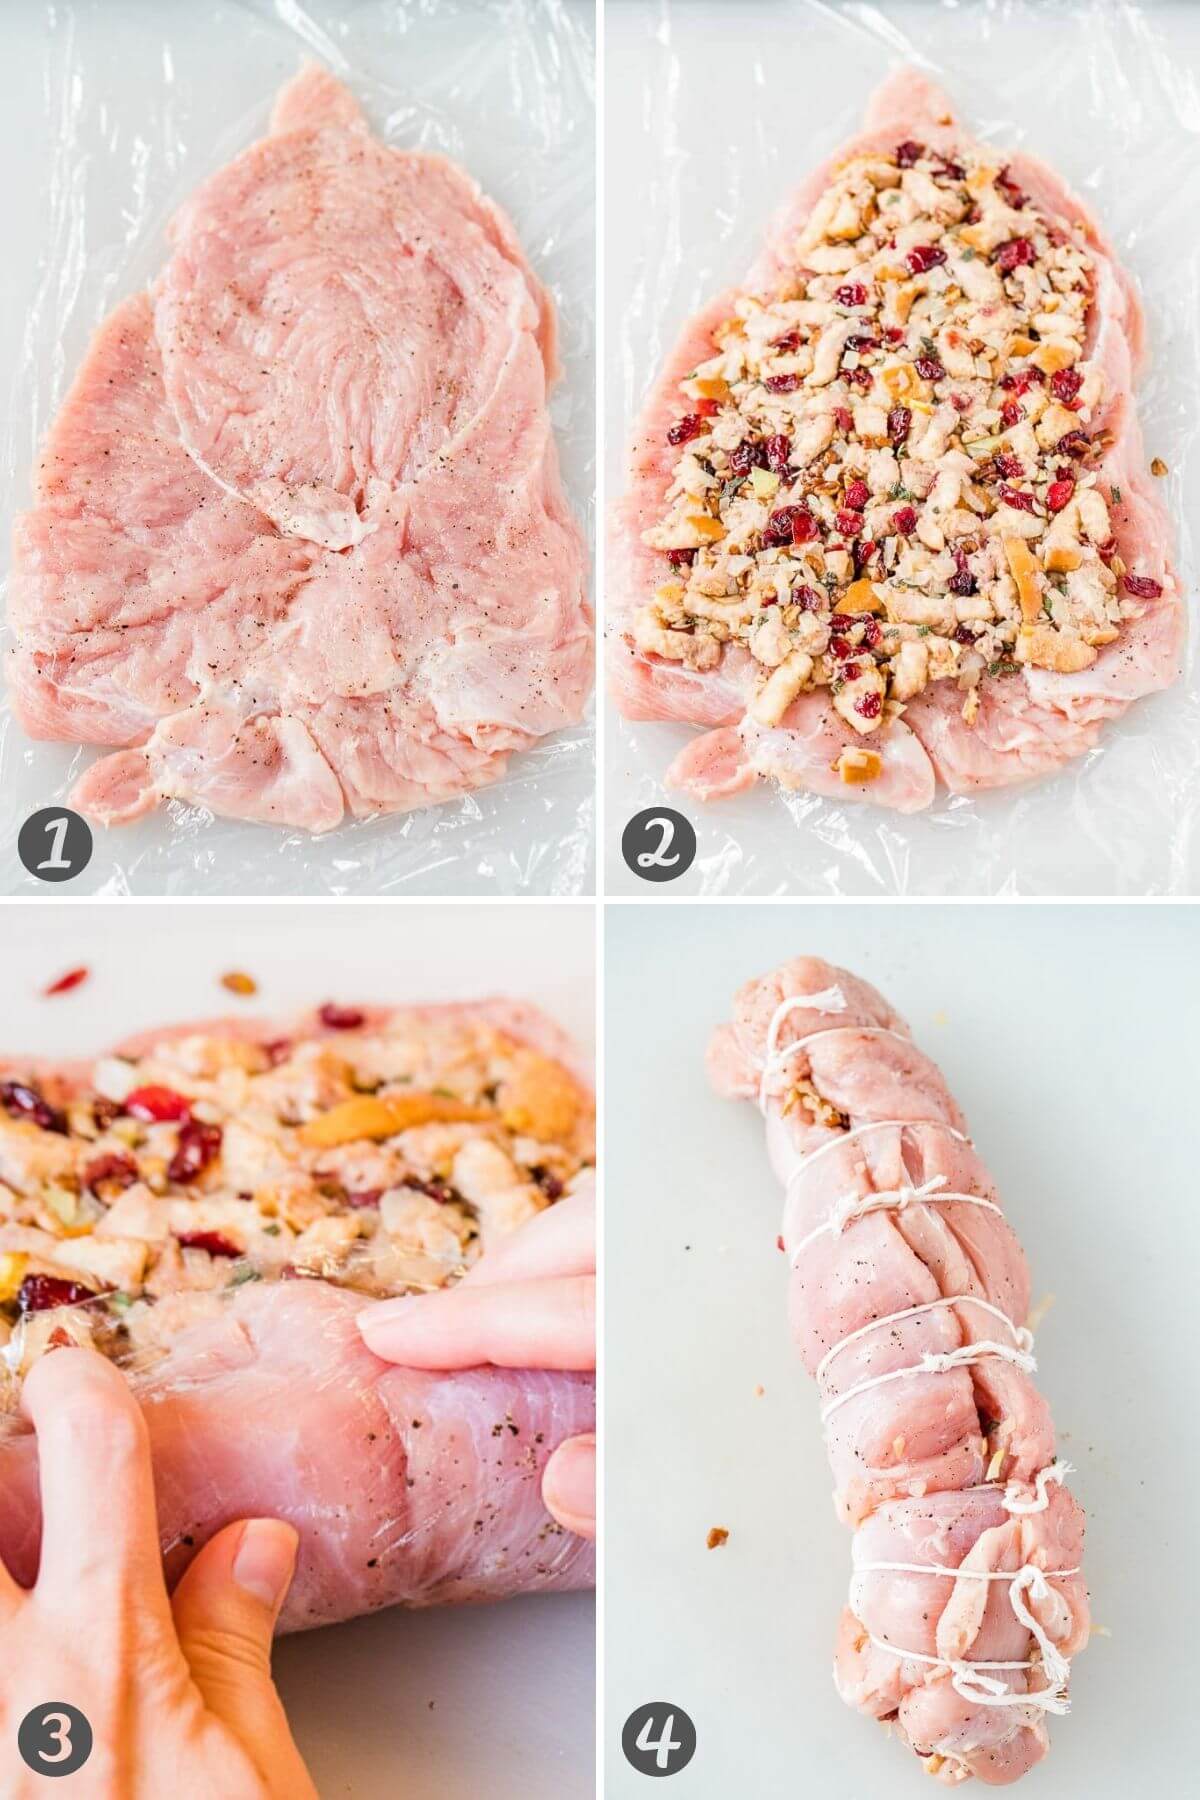 Step by step instructions for how to roll a stuffed turkey breast